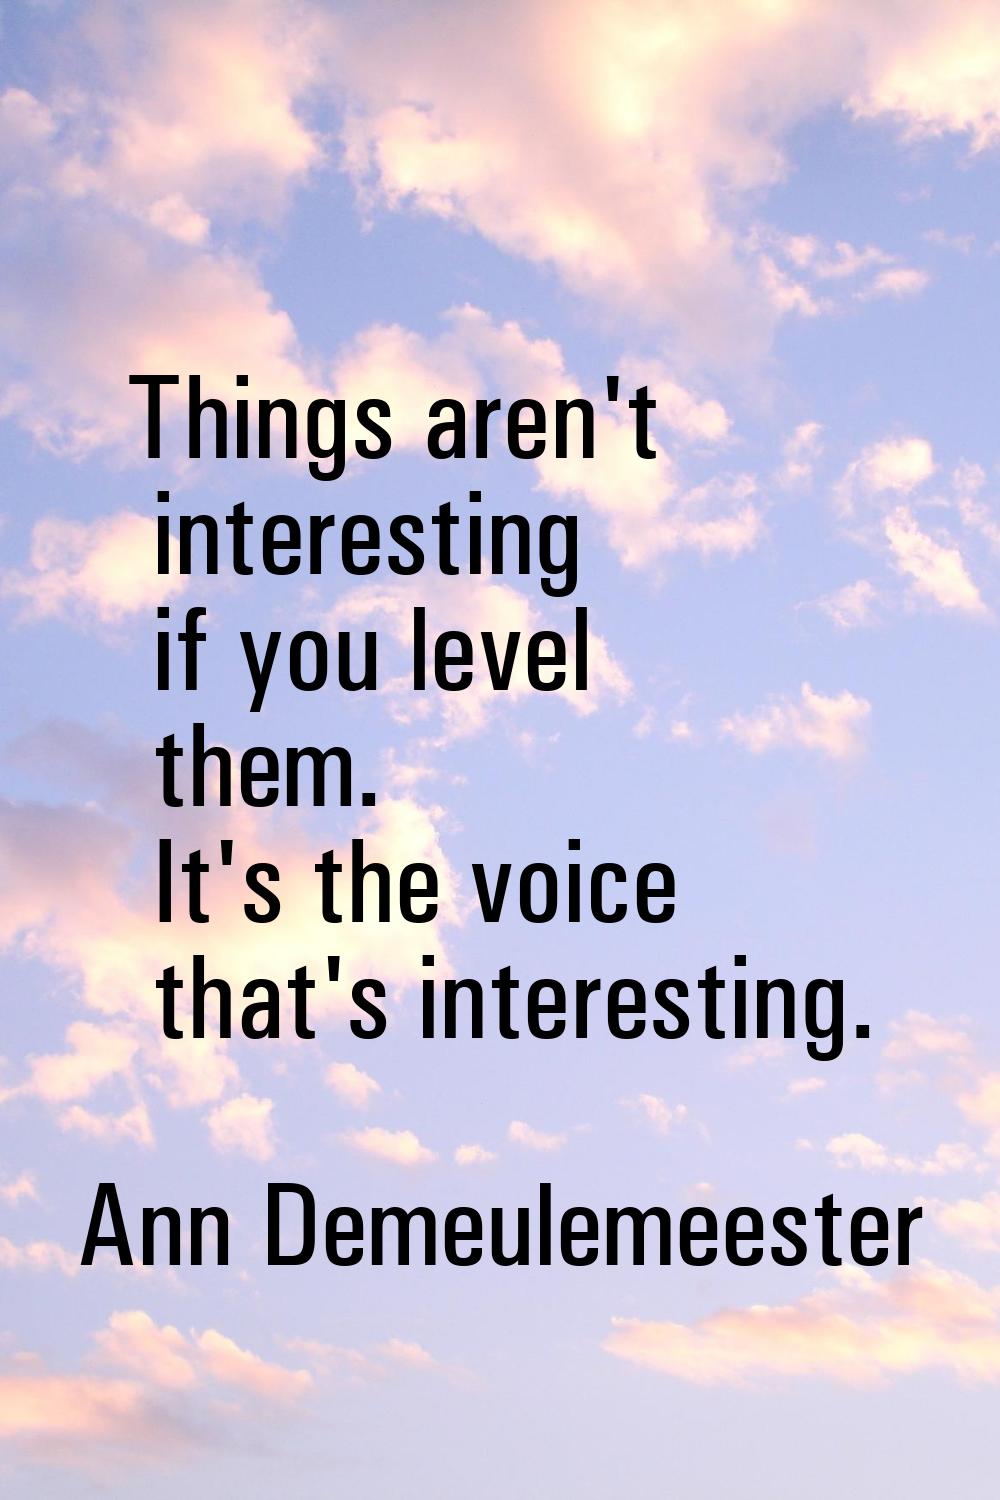 Things aren't interesting if you level them. It's the voice that's interesting.